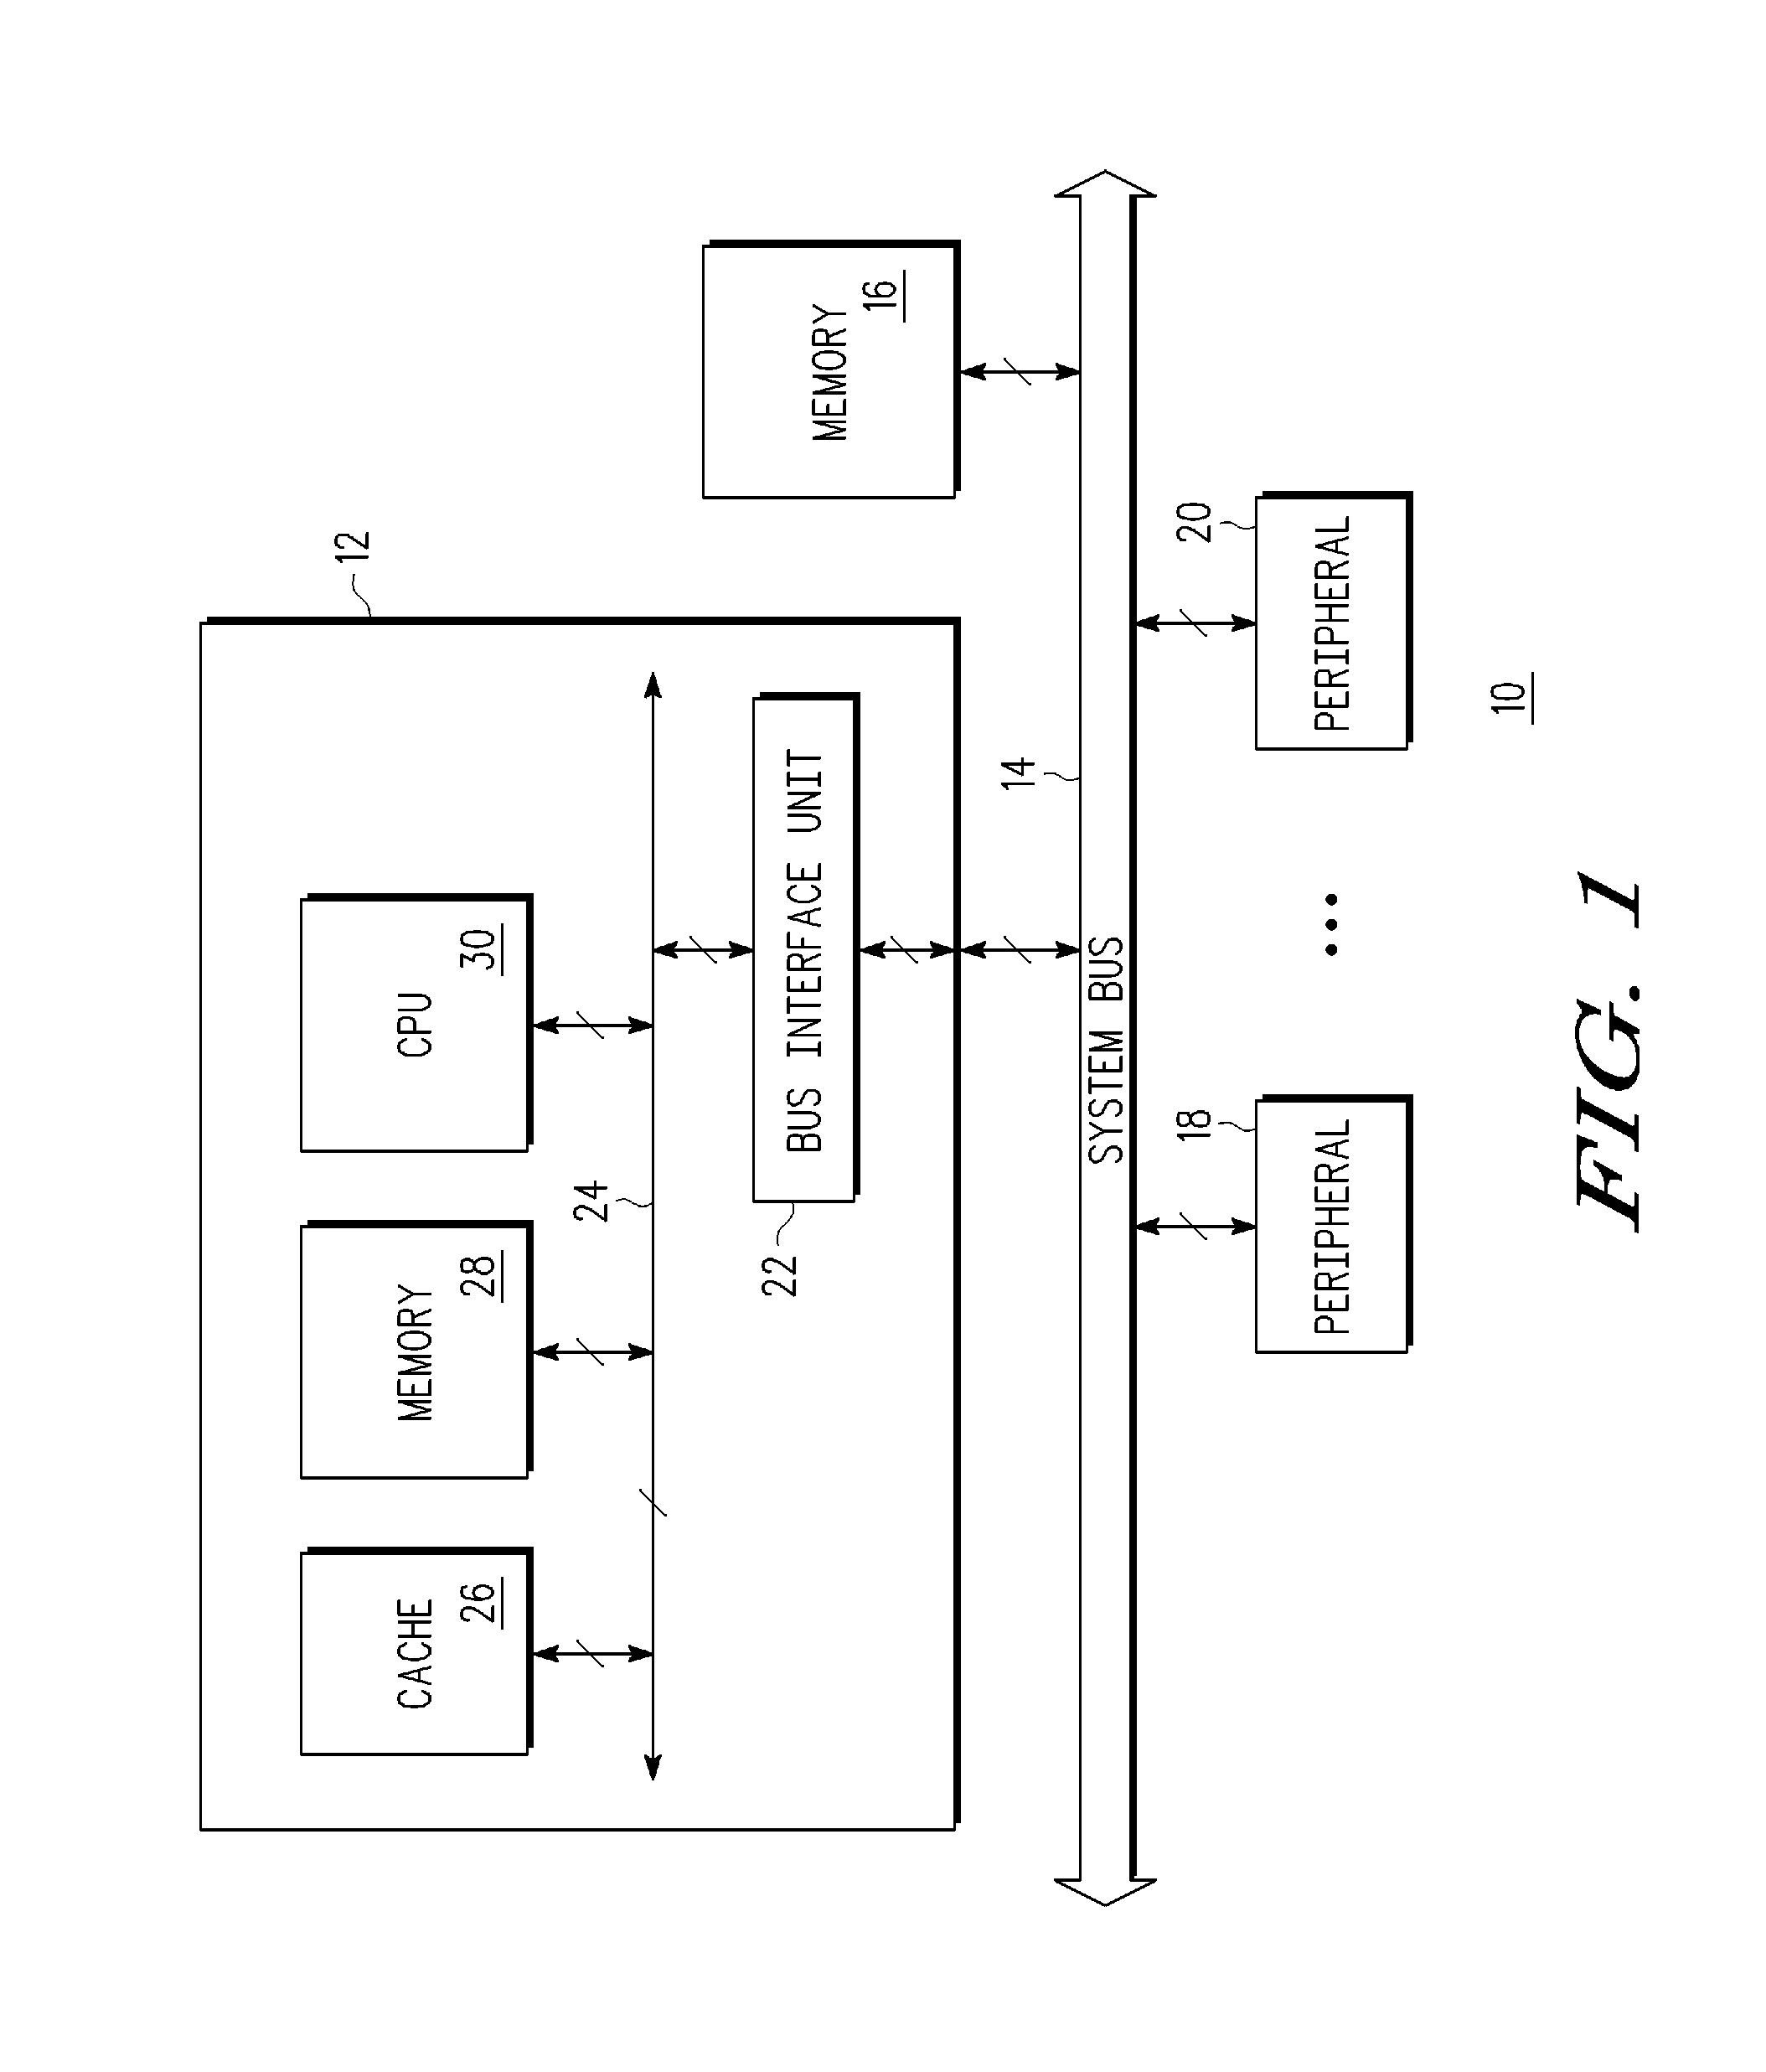 Configurable pipeline based on error detection mode in a data processing system